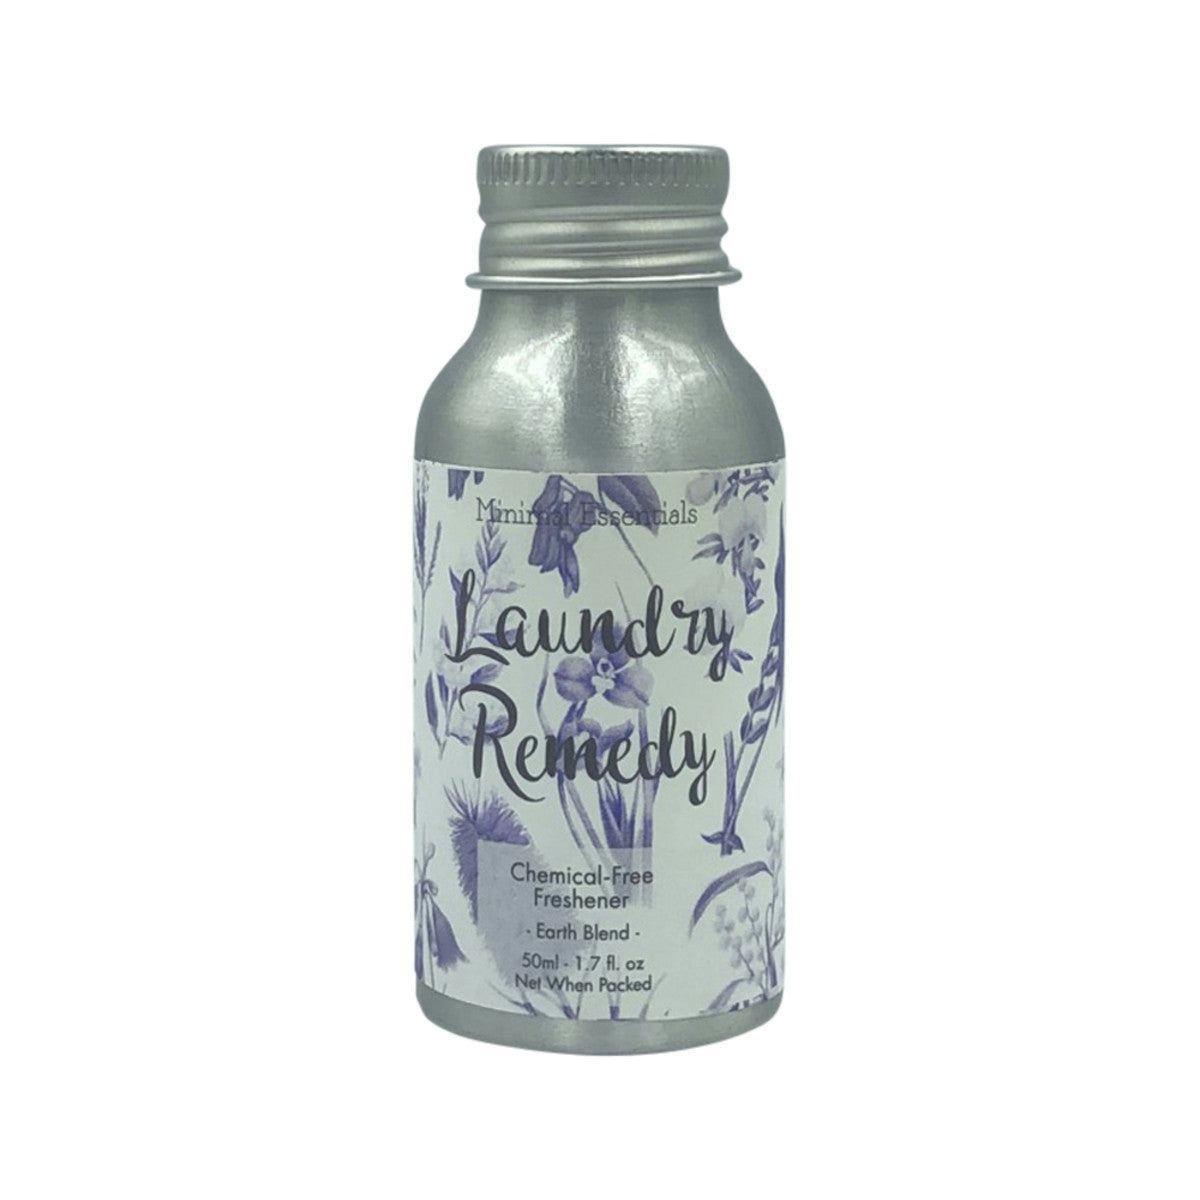 image of Minimal Essentials Laundry Remedy (Chemical-Free Freshener) Earth Blend 50ml on white background